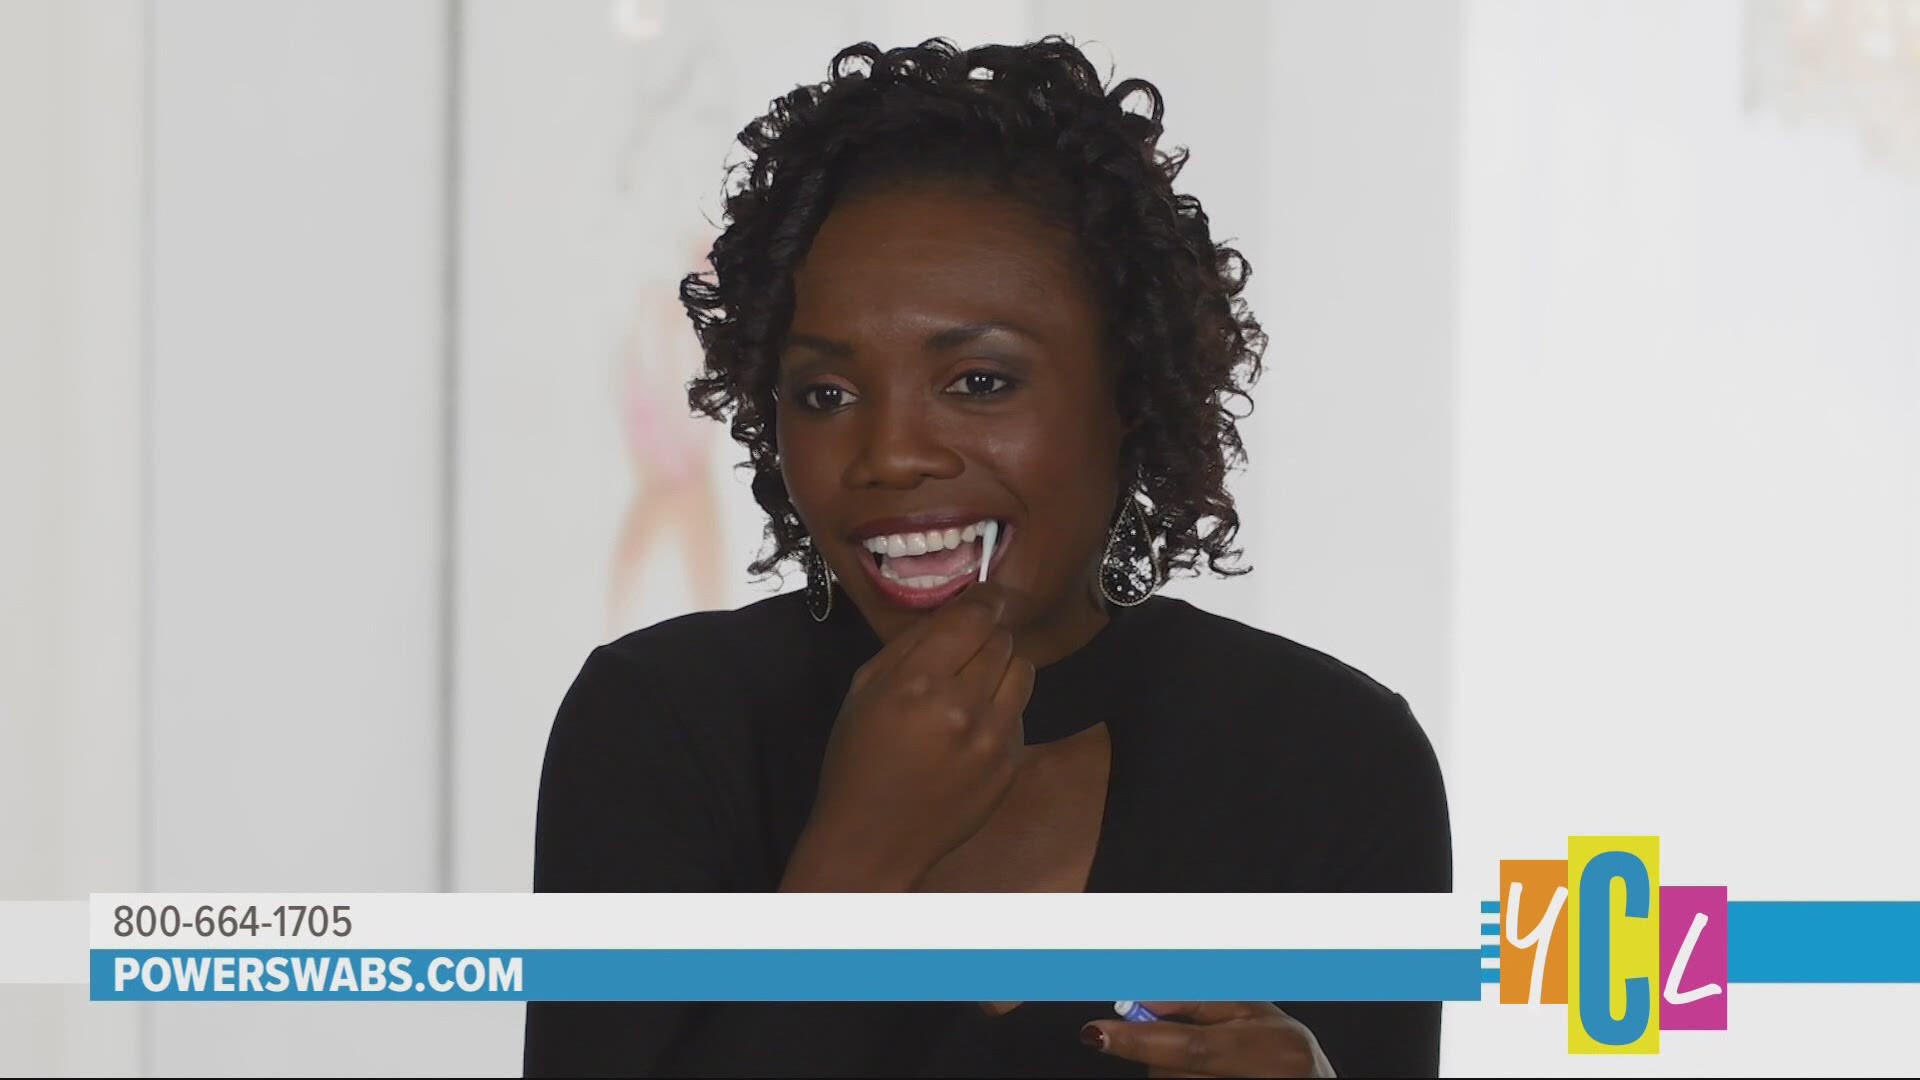 Power Swabs is known for whitening teeth in as little as seven days with its at-home teeth whitening kit. This segment was paid for True Earth Health Solutions.